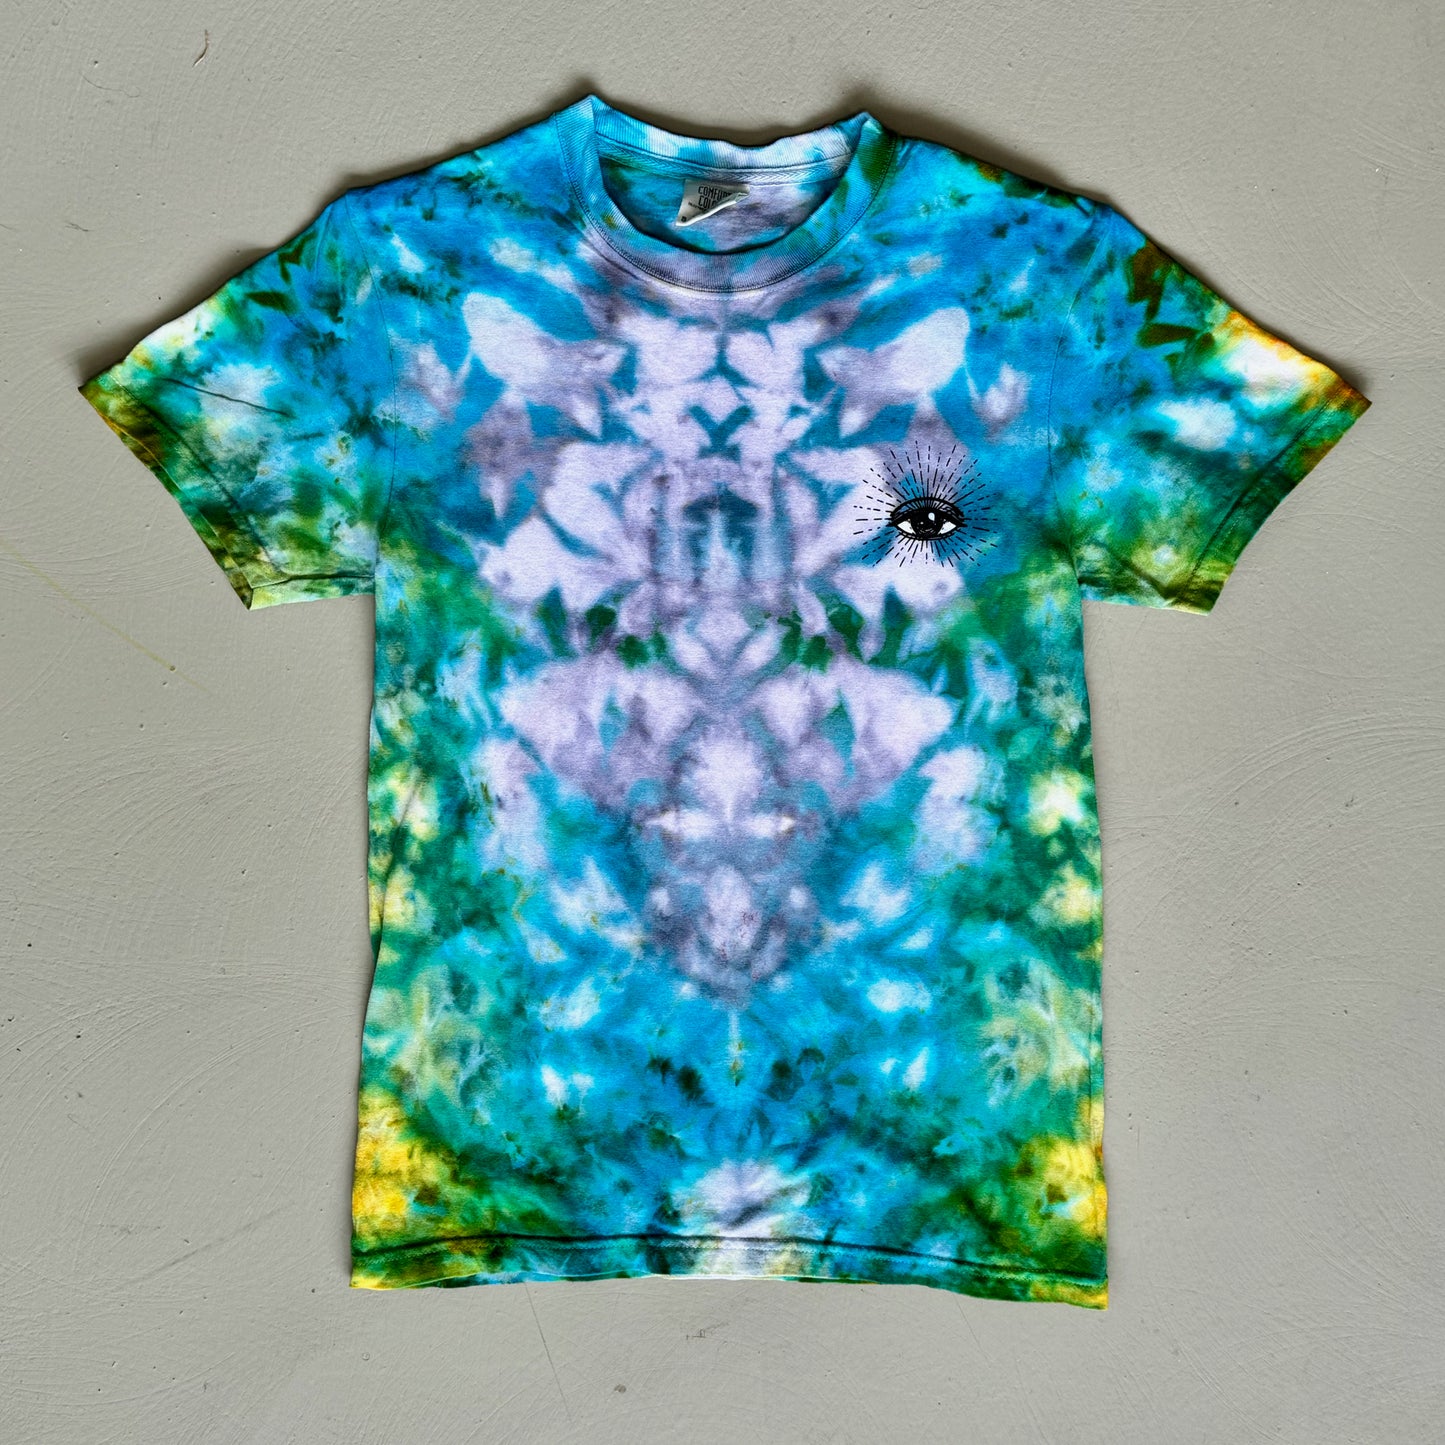 Support Your Local Psy Op Rorschach Tie Dye Small